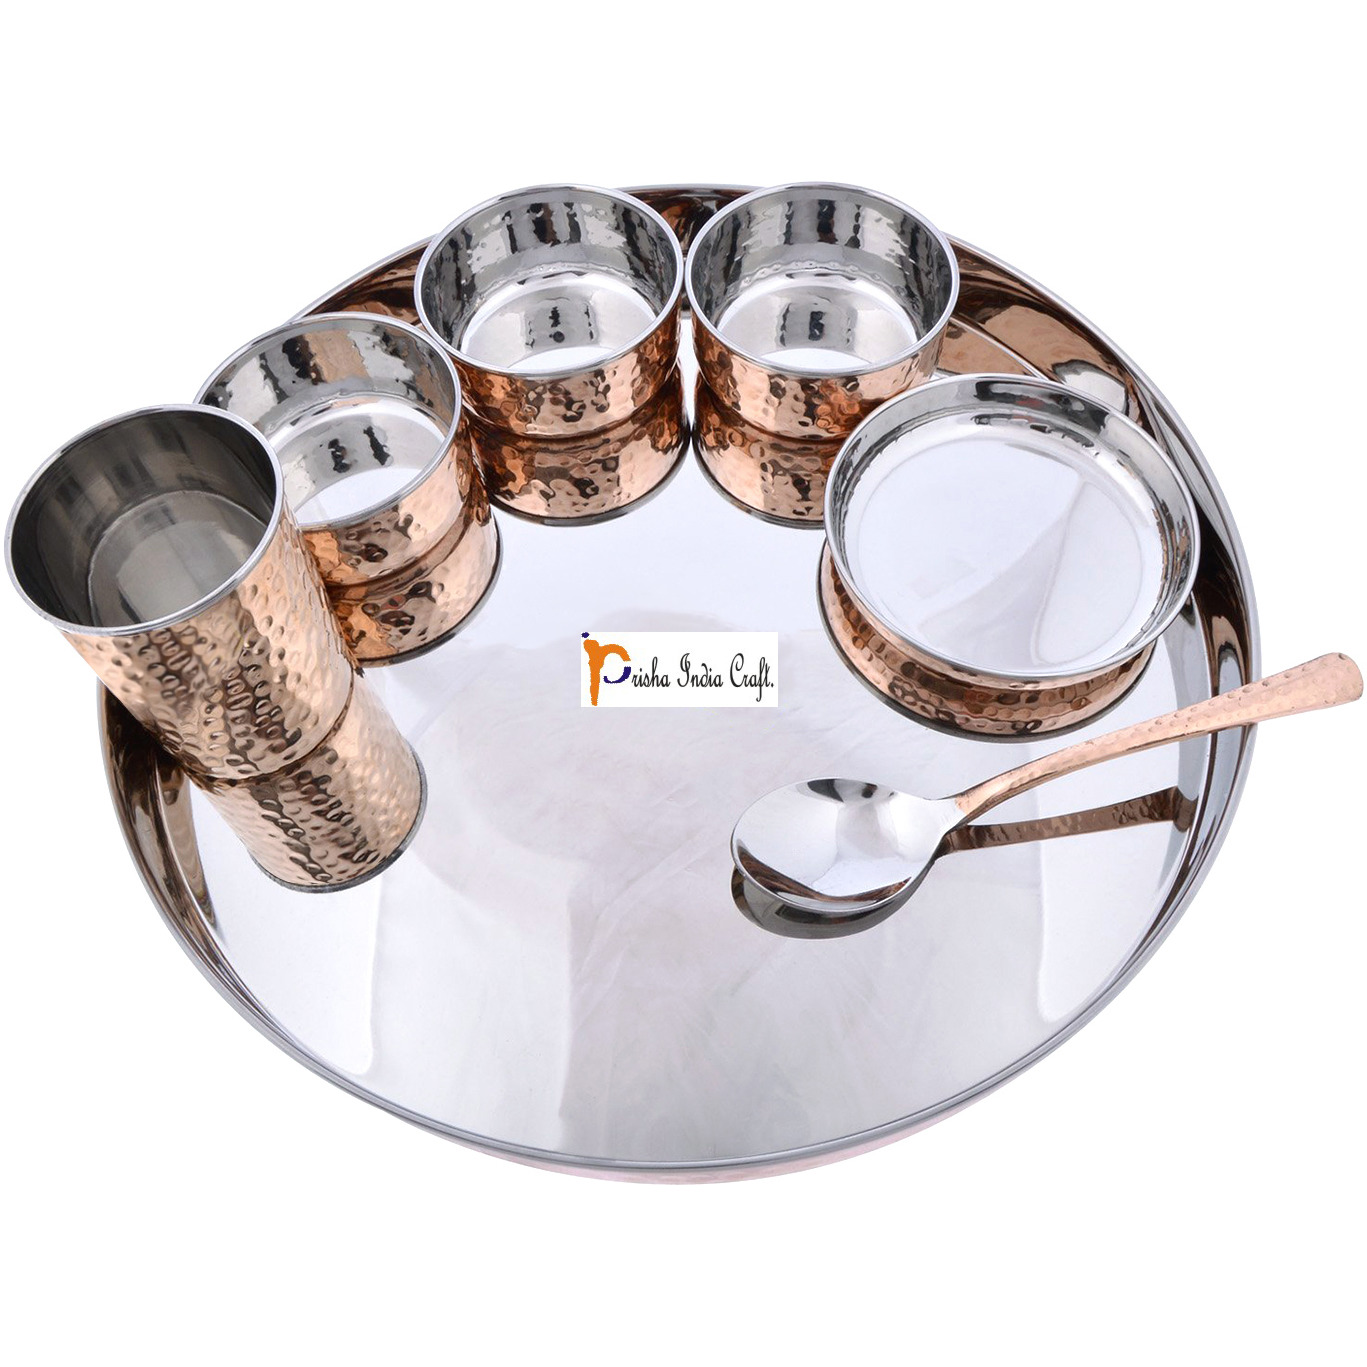 Prisha India Craft B. Set of 6 Dinnerware Traditional Stainless Steel Copper Dinner Set of Thali Plate, Bowls, Glass and Spoon, Dia 13  With 1 Luxury Style Stainless Steel Copper Pitcher Jug - Christmas Gift